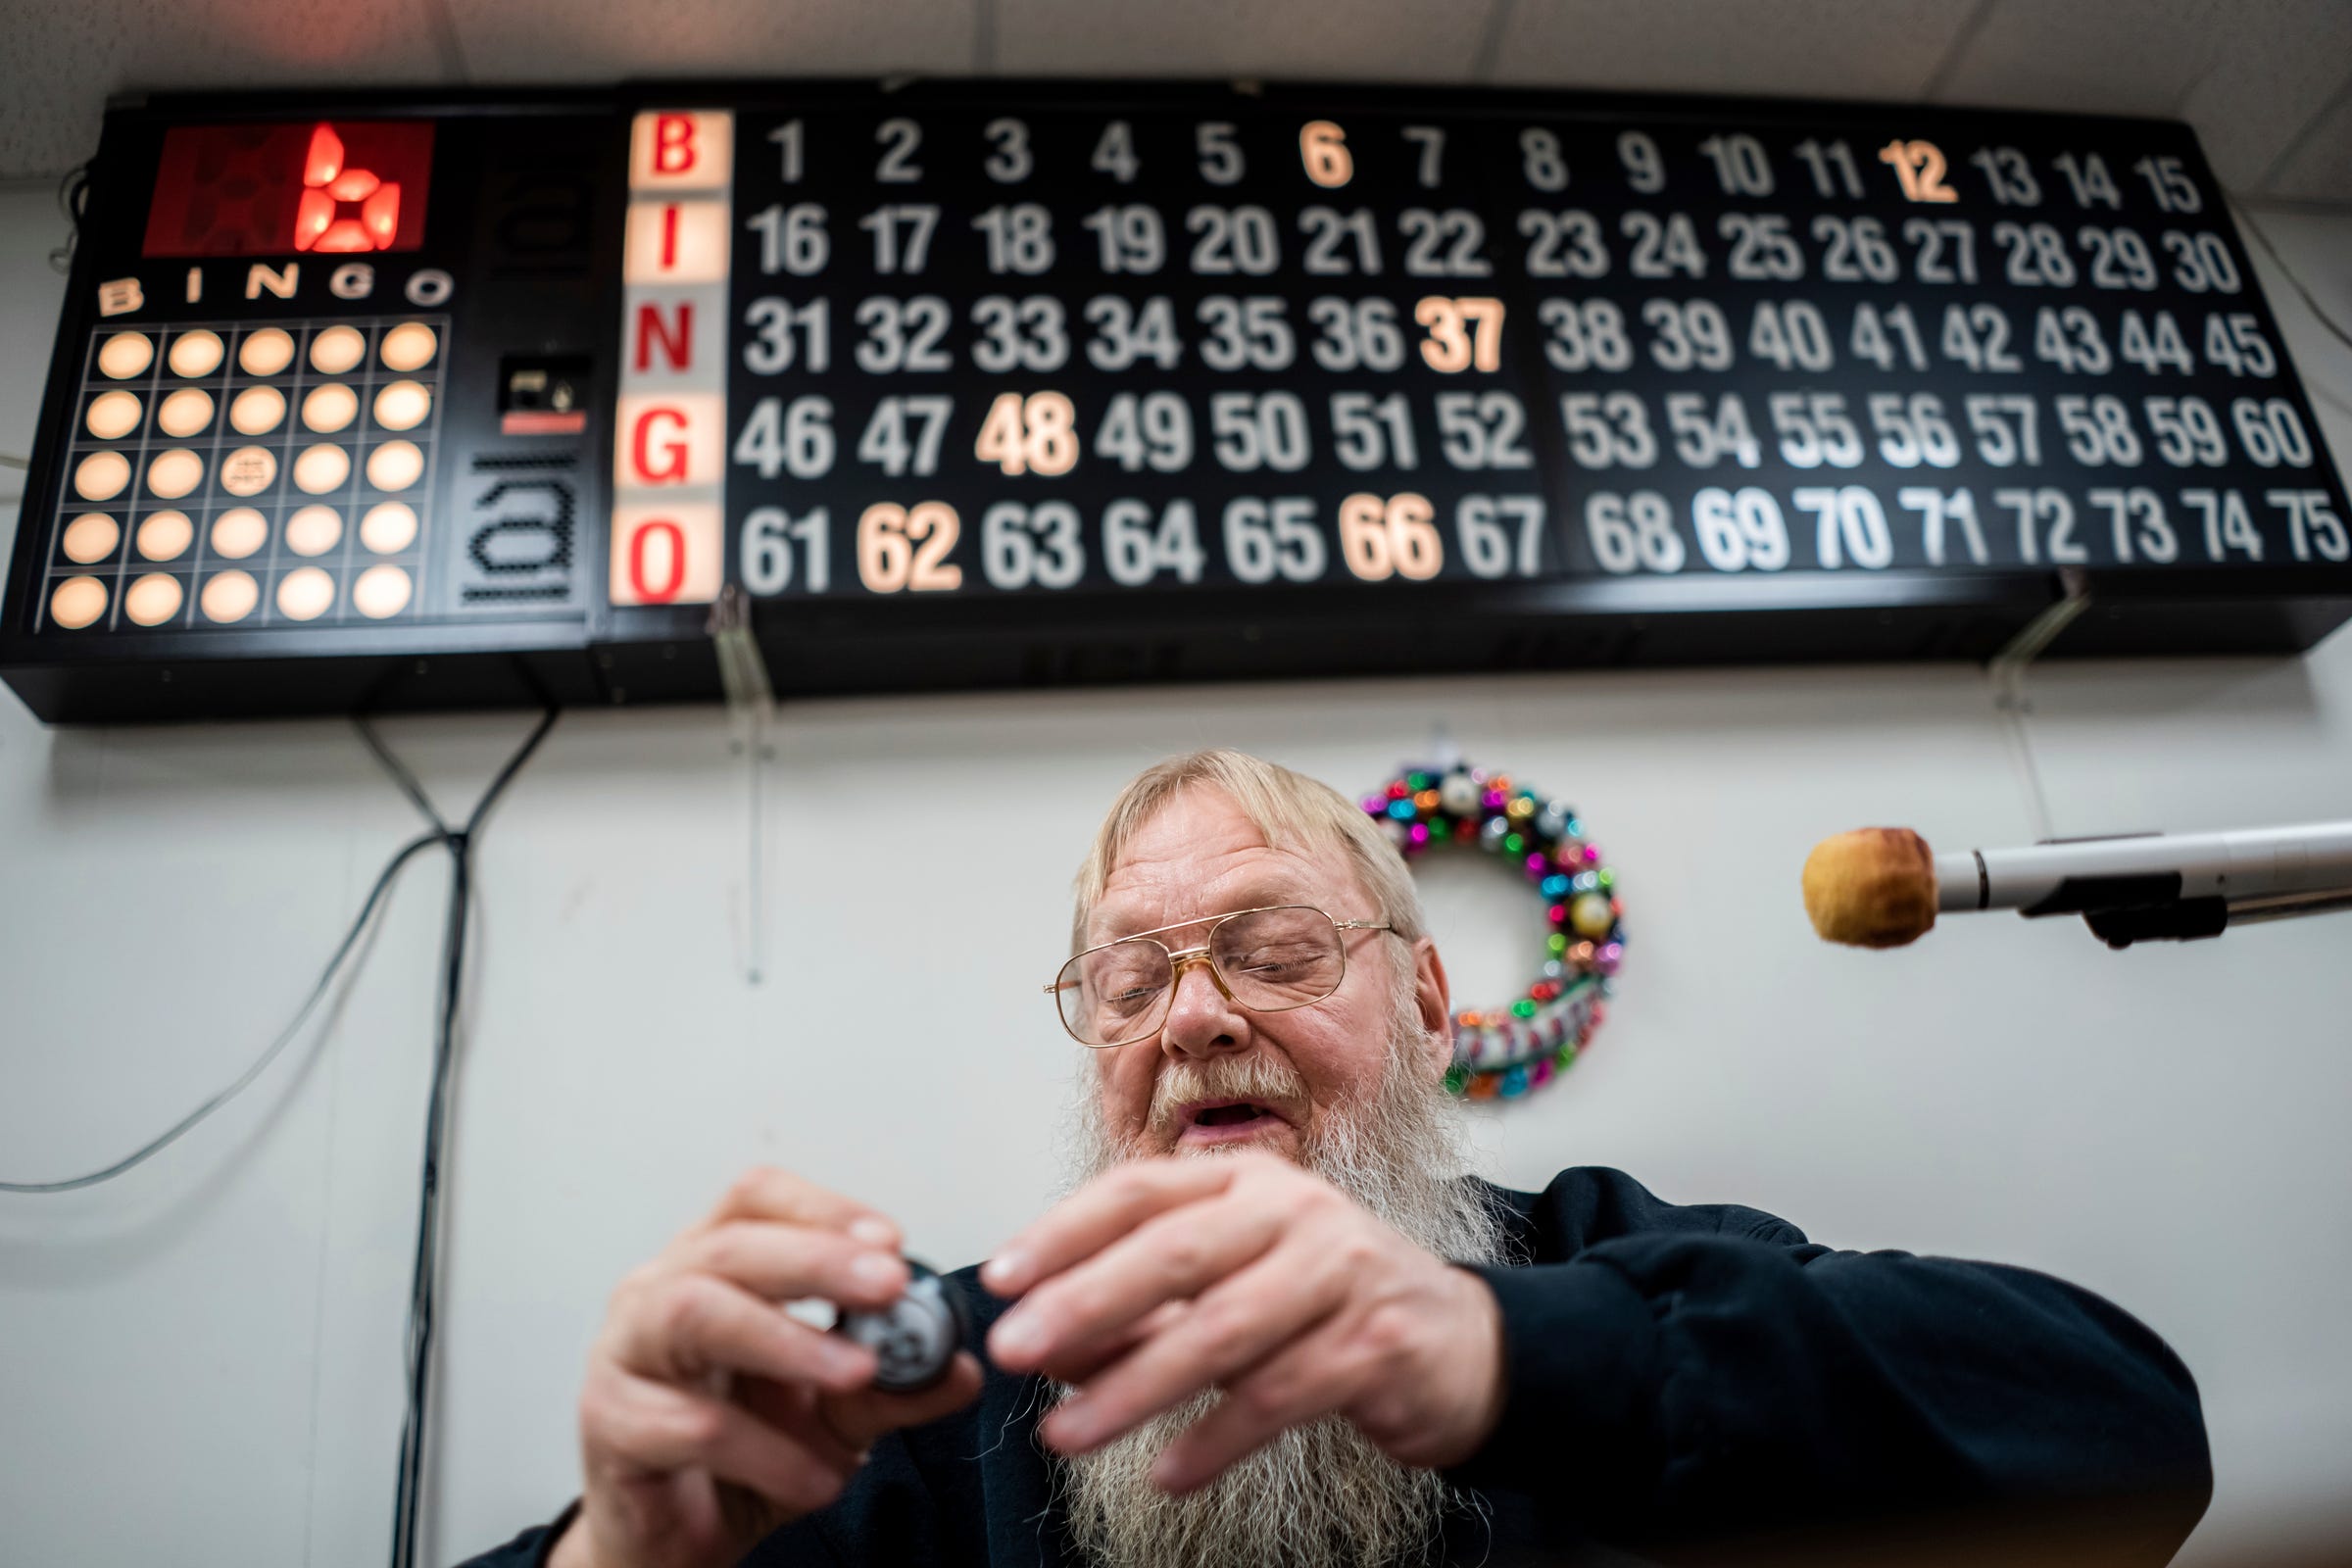 Dan Kohtala, of Ishpeming, calls the numbers during Friday night bingo at the Independent Order of Odd Fellows' building in Ishpeming on Friday, Feb. 10, 2023, in Michigan's Upper Peninsula.